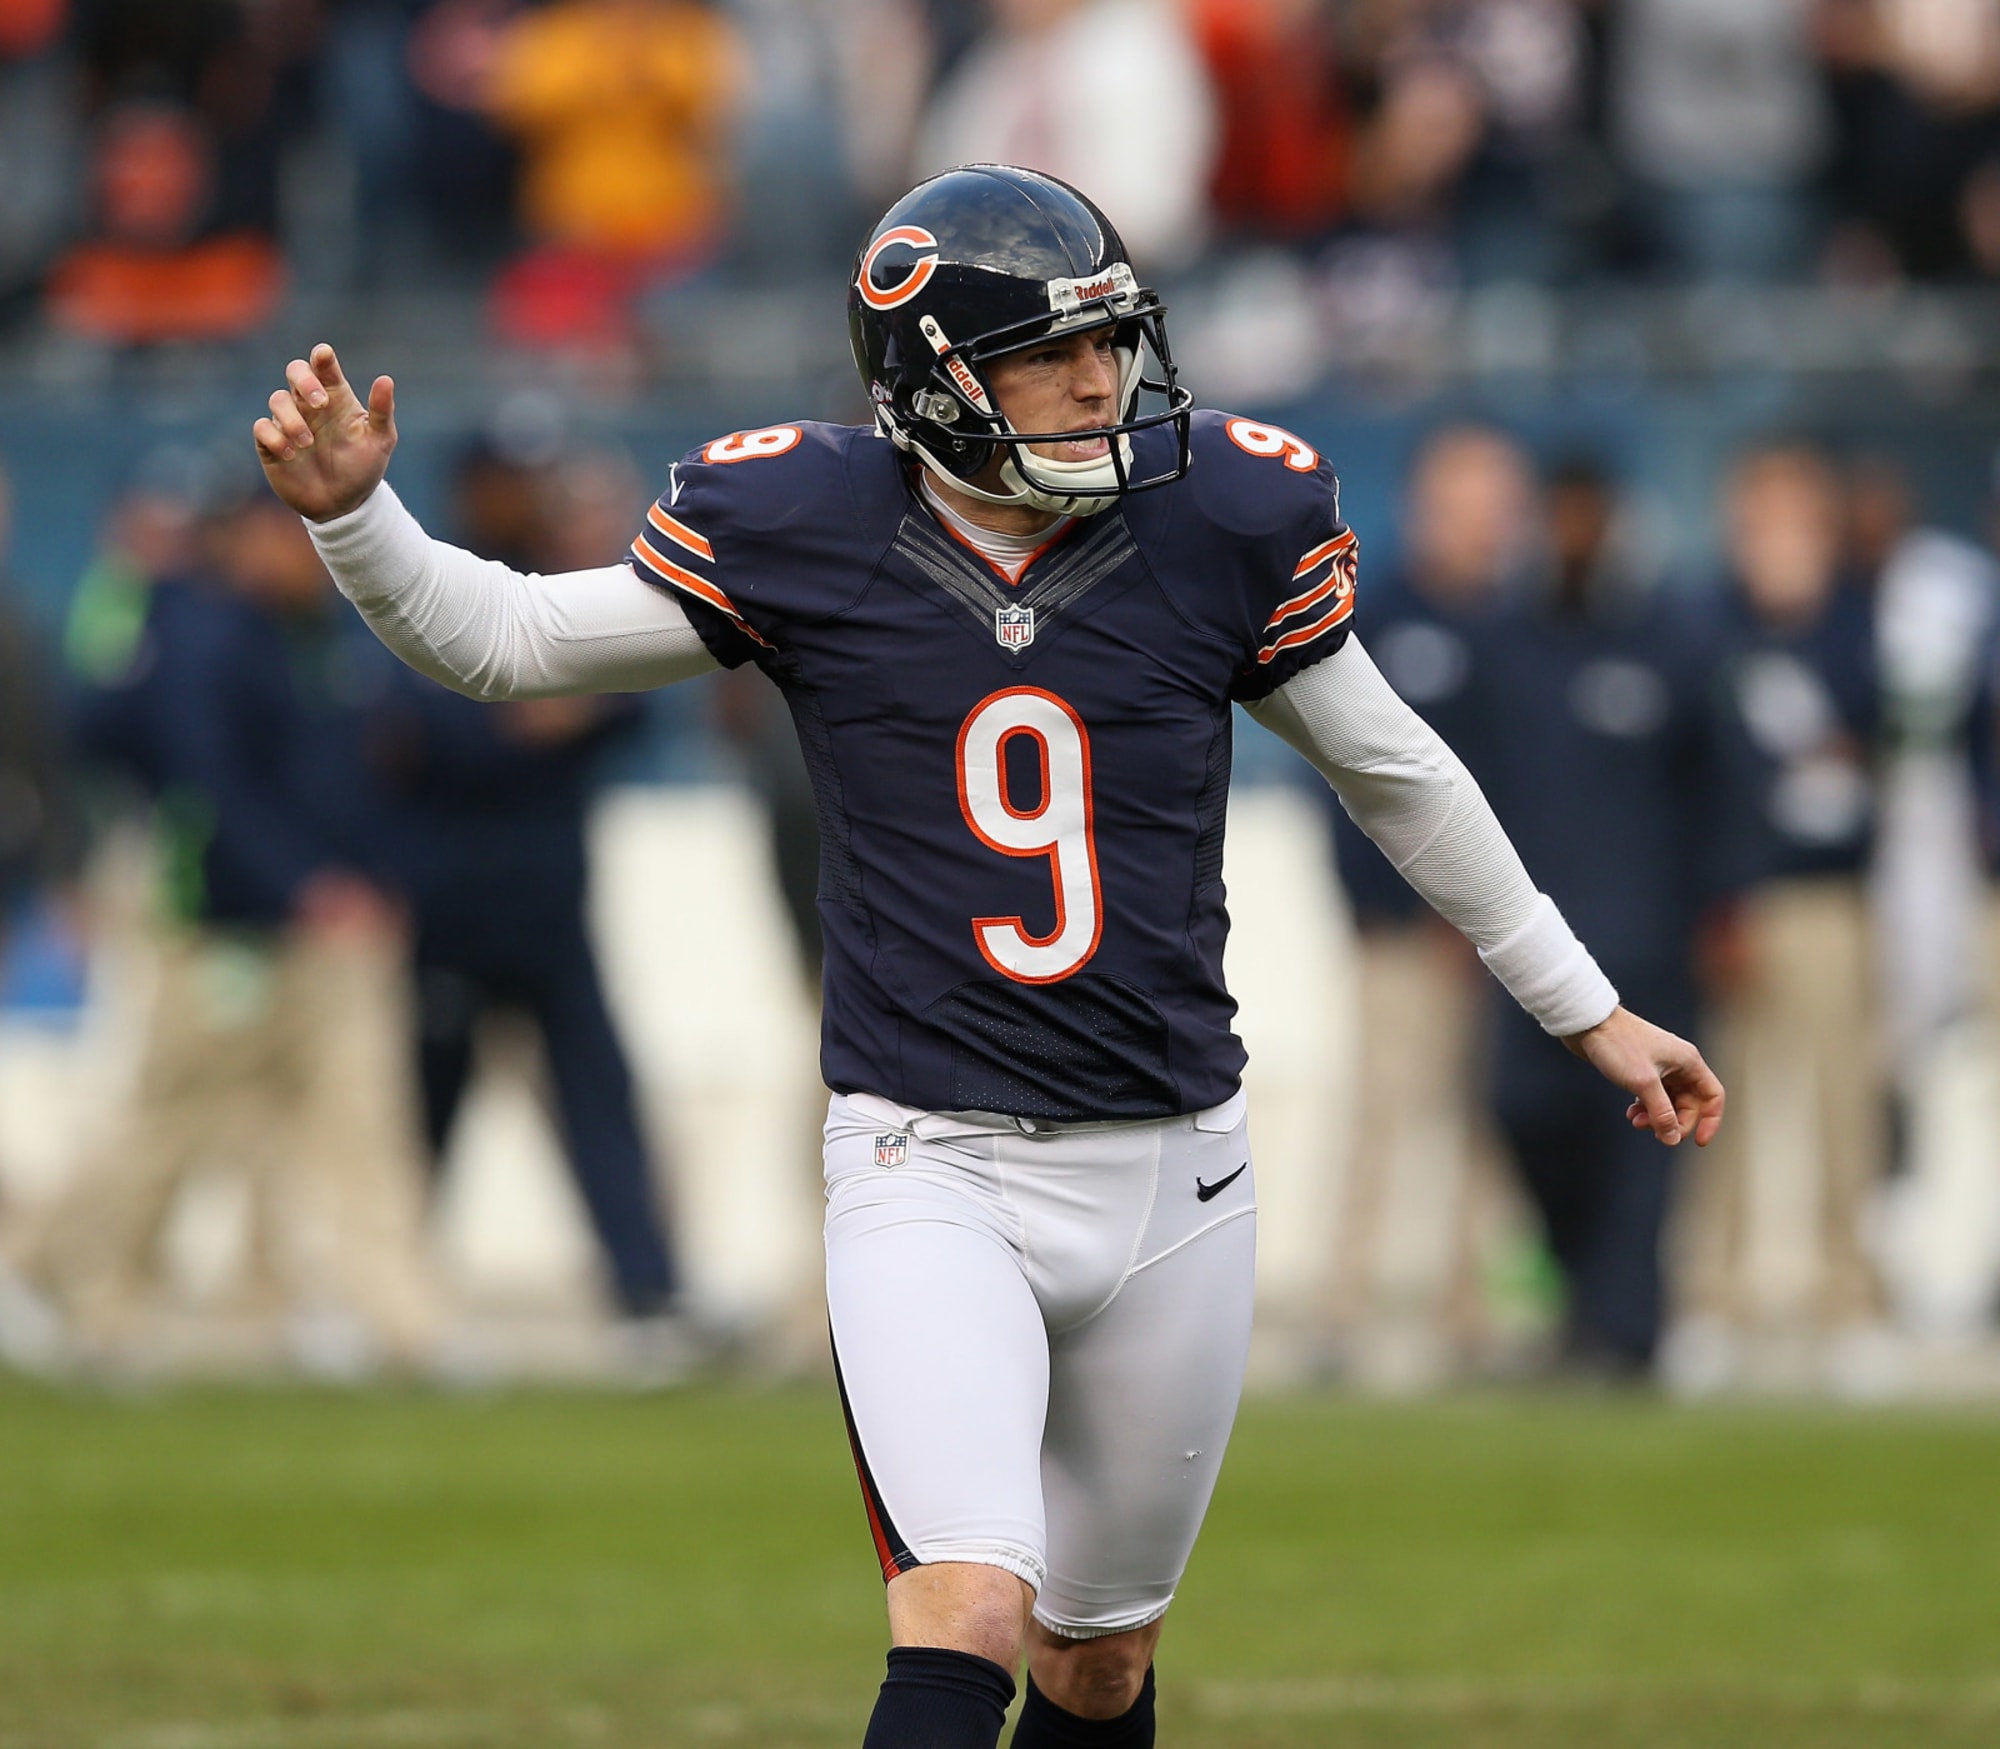 Chicago Bears: Robbie Gould requests trade, wants to return home